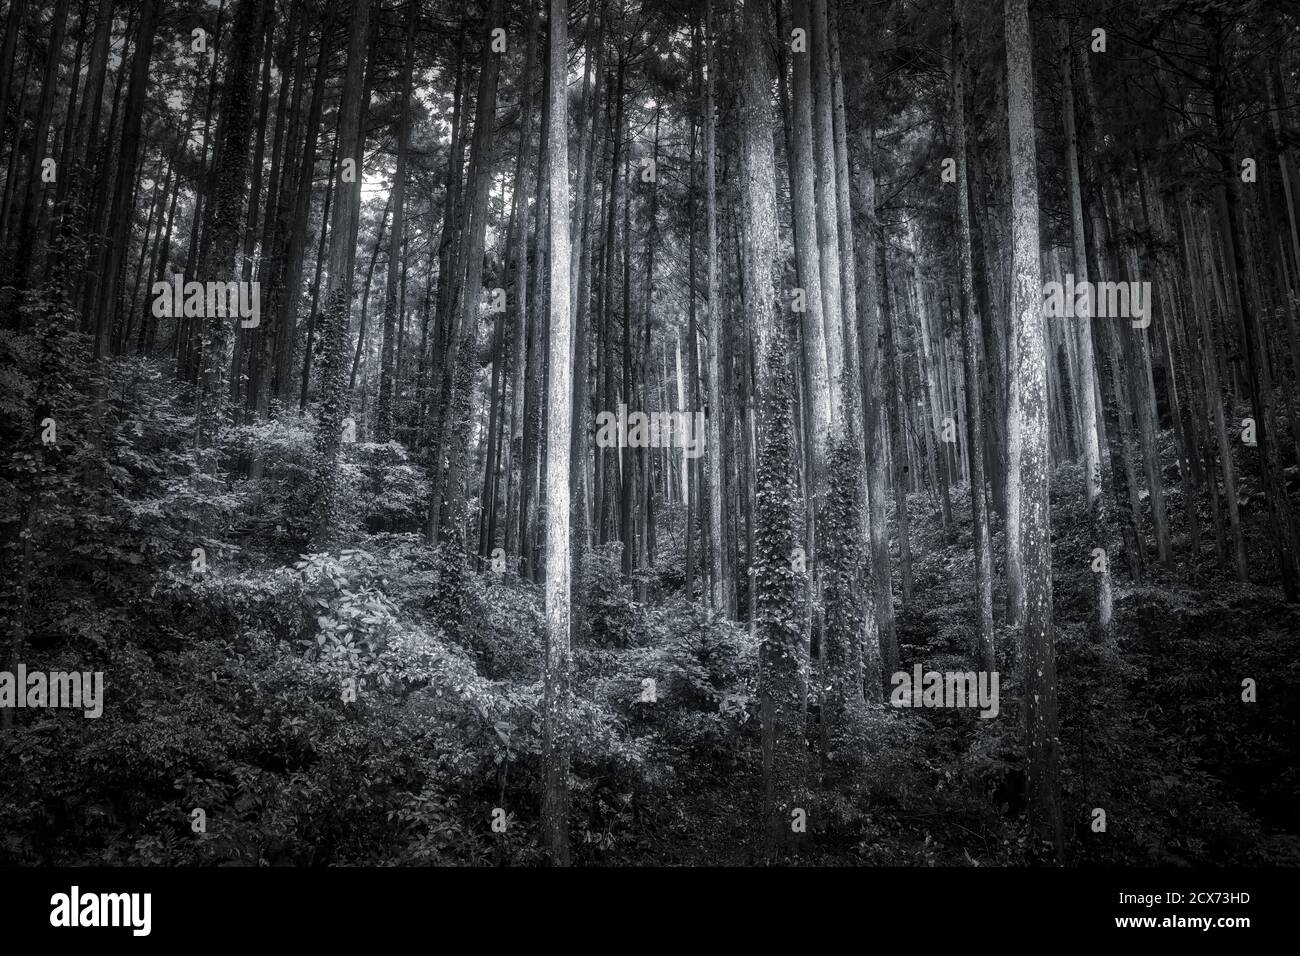 The tall trees of a forest near Odawara, Japan. Stock Photo